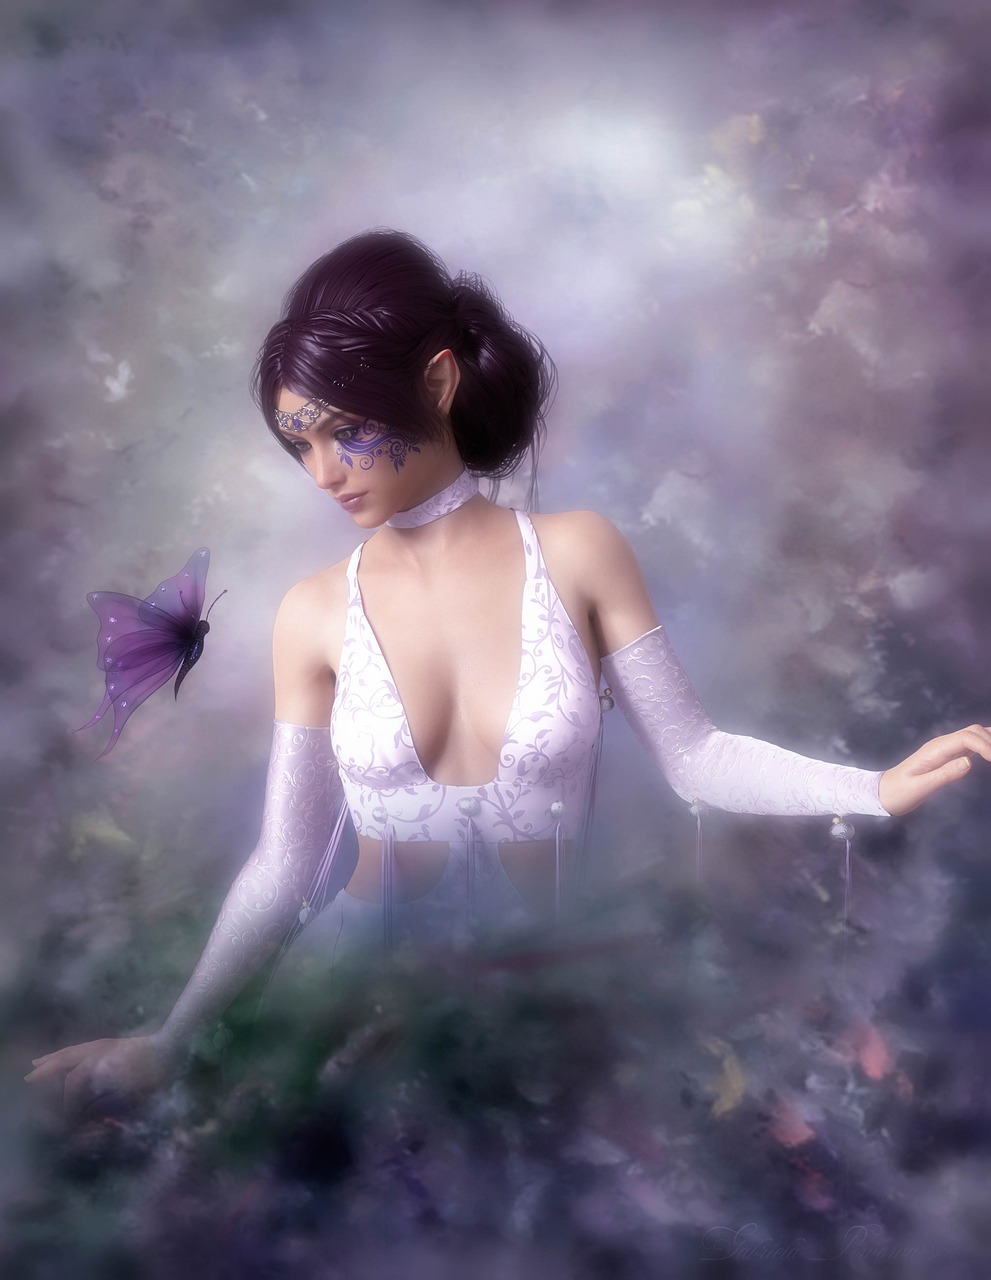 a woman in a white dress holding a purple butterfly, trending on cg society, fantasy art, soft mist, beautiful avatar pictures, ivy, softness